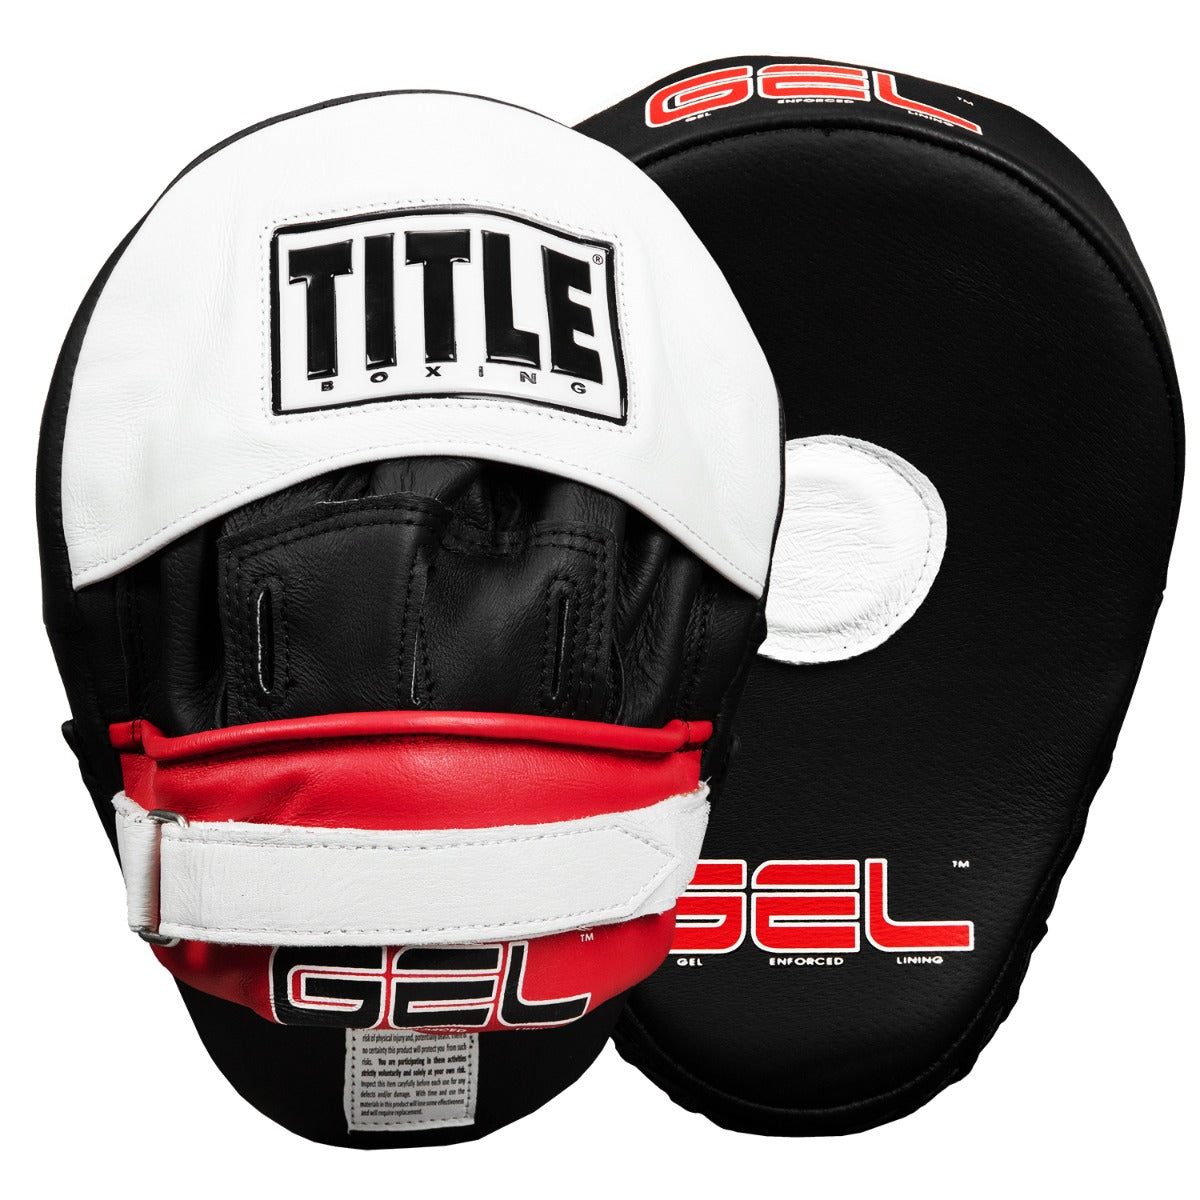 TITLE GEL World Contoured Punch Mitts